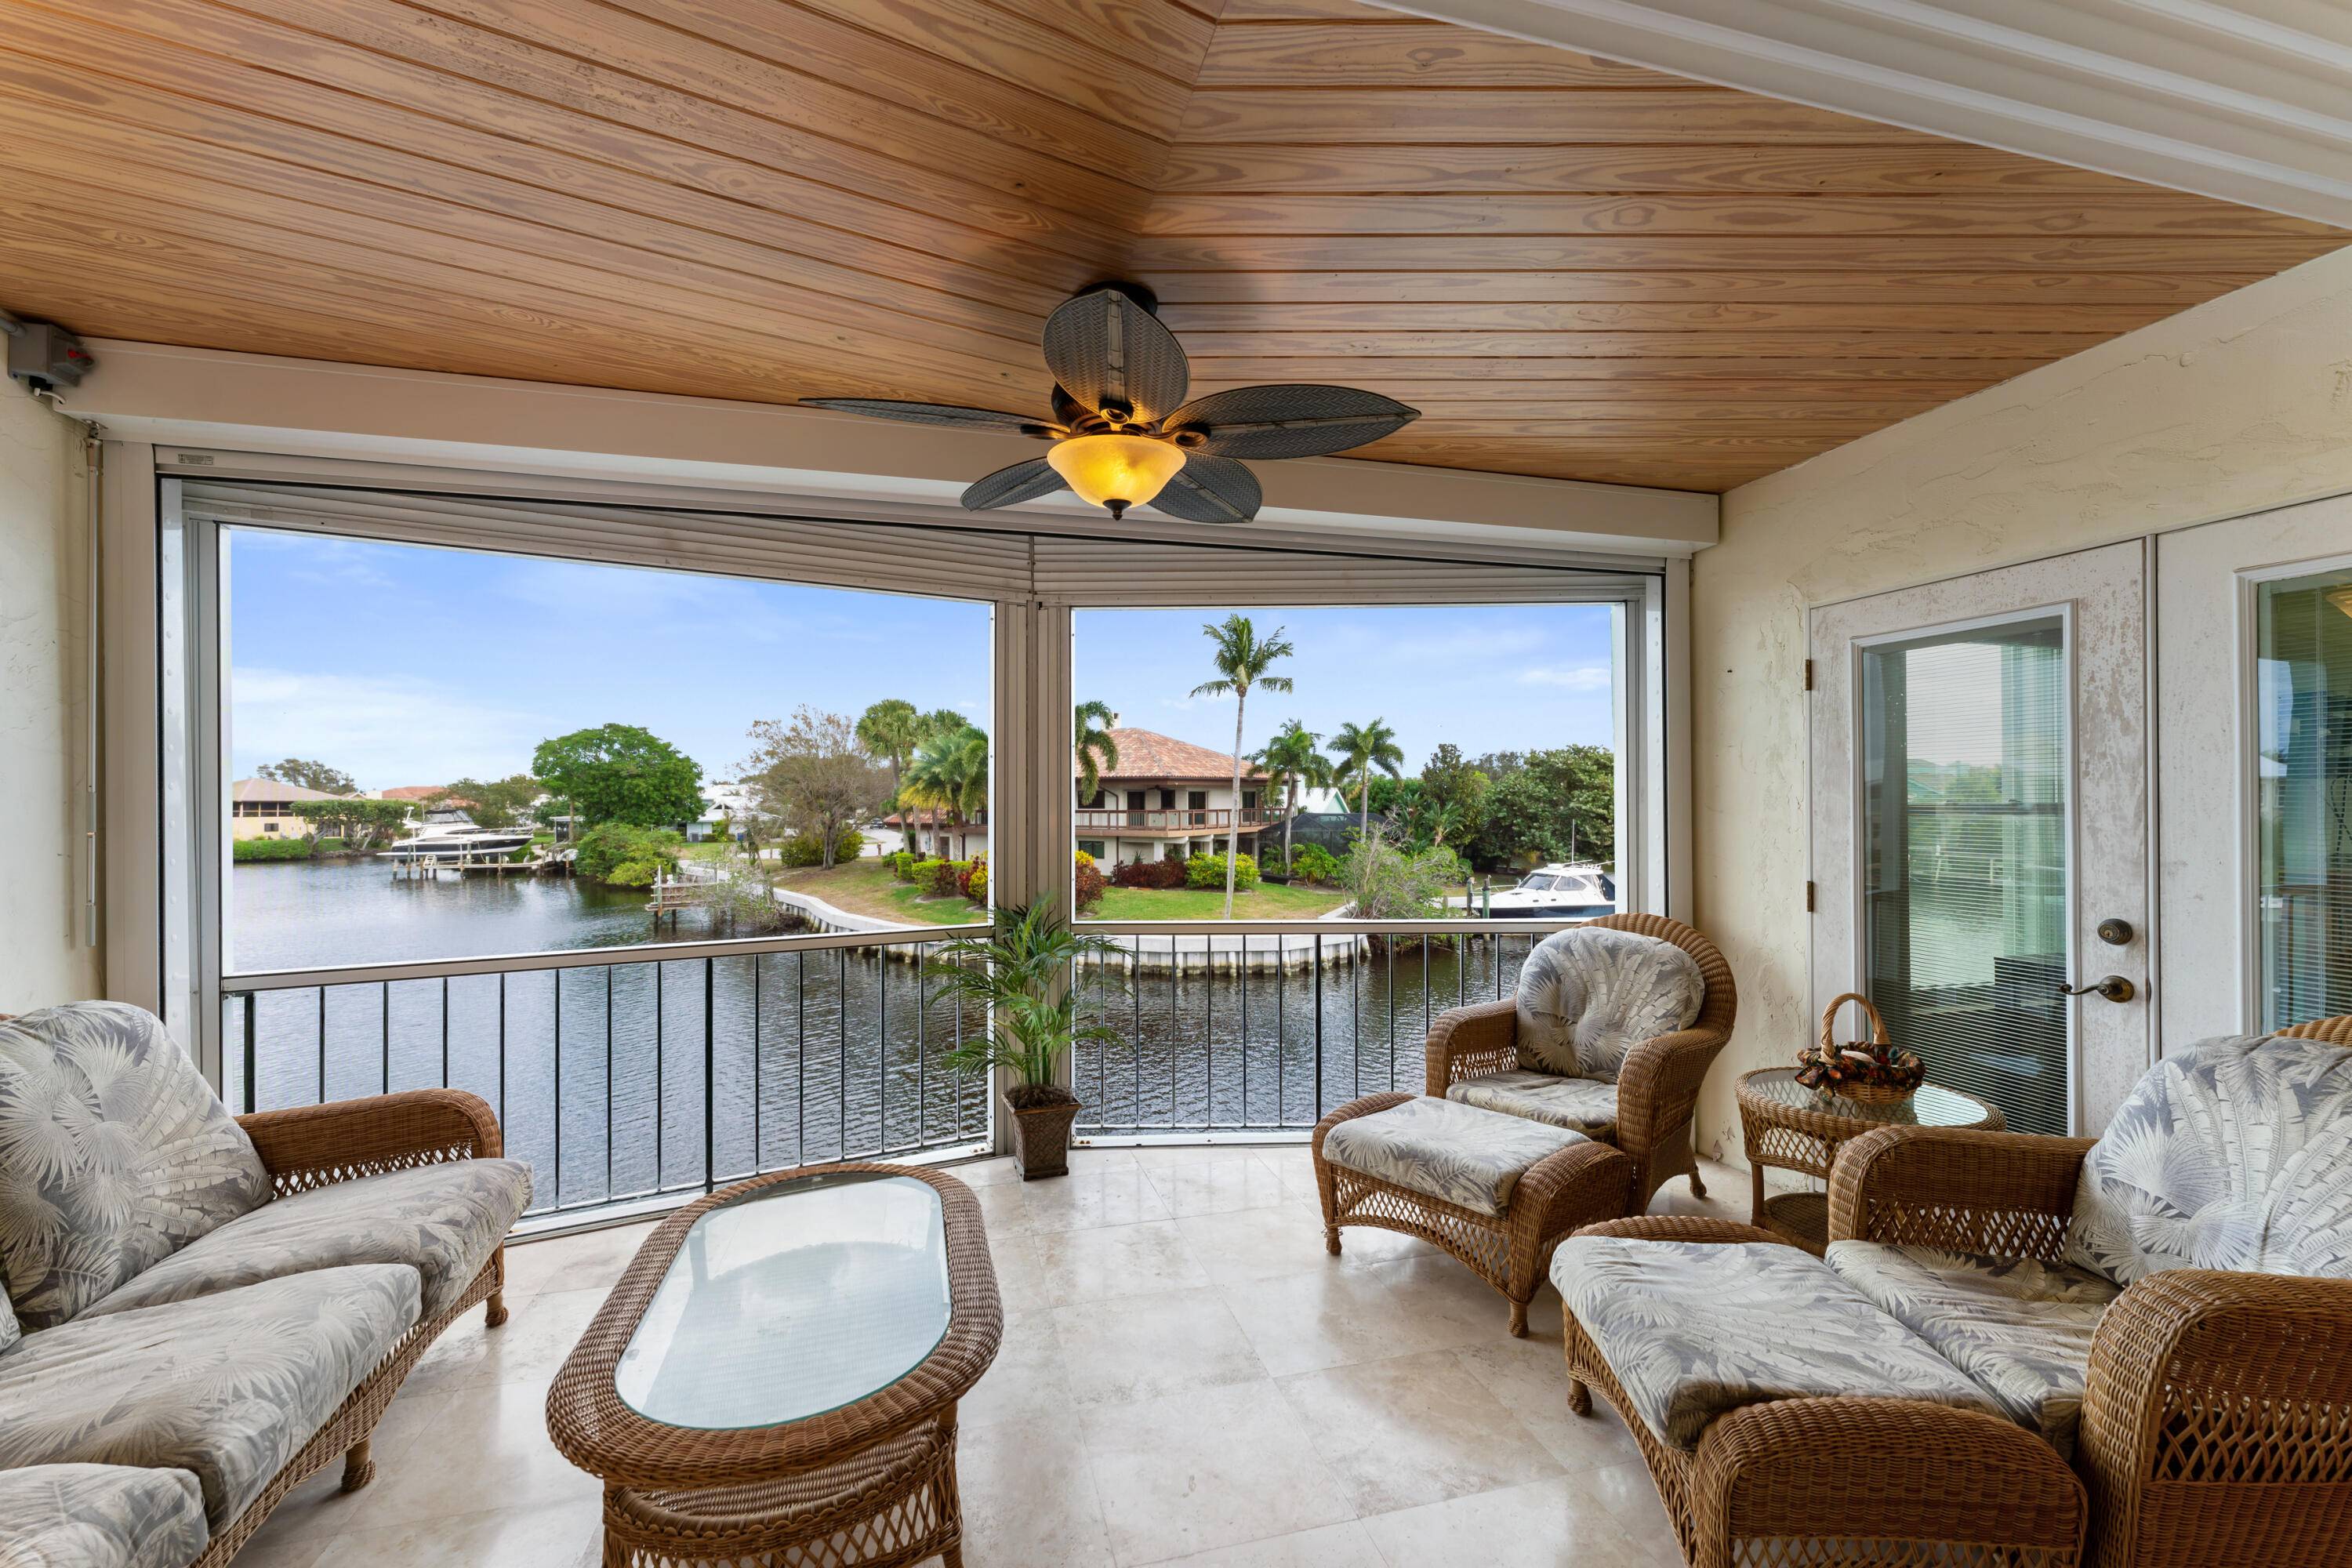 Location, Location... You can only get this fabulous of a view from this 2nd floor end unit in the highly sought after Mariner Cay Community just minutes from the inlet.